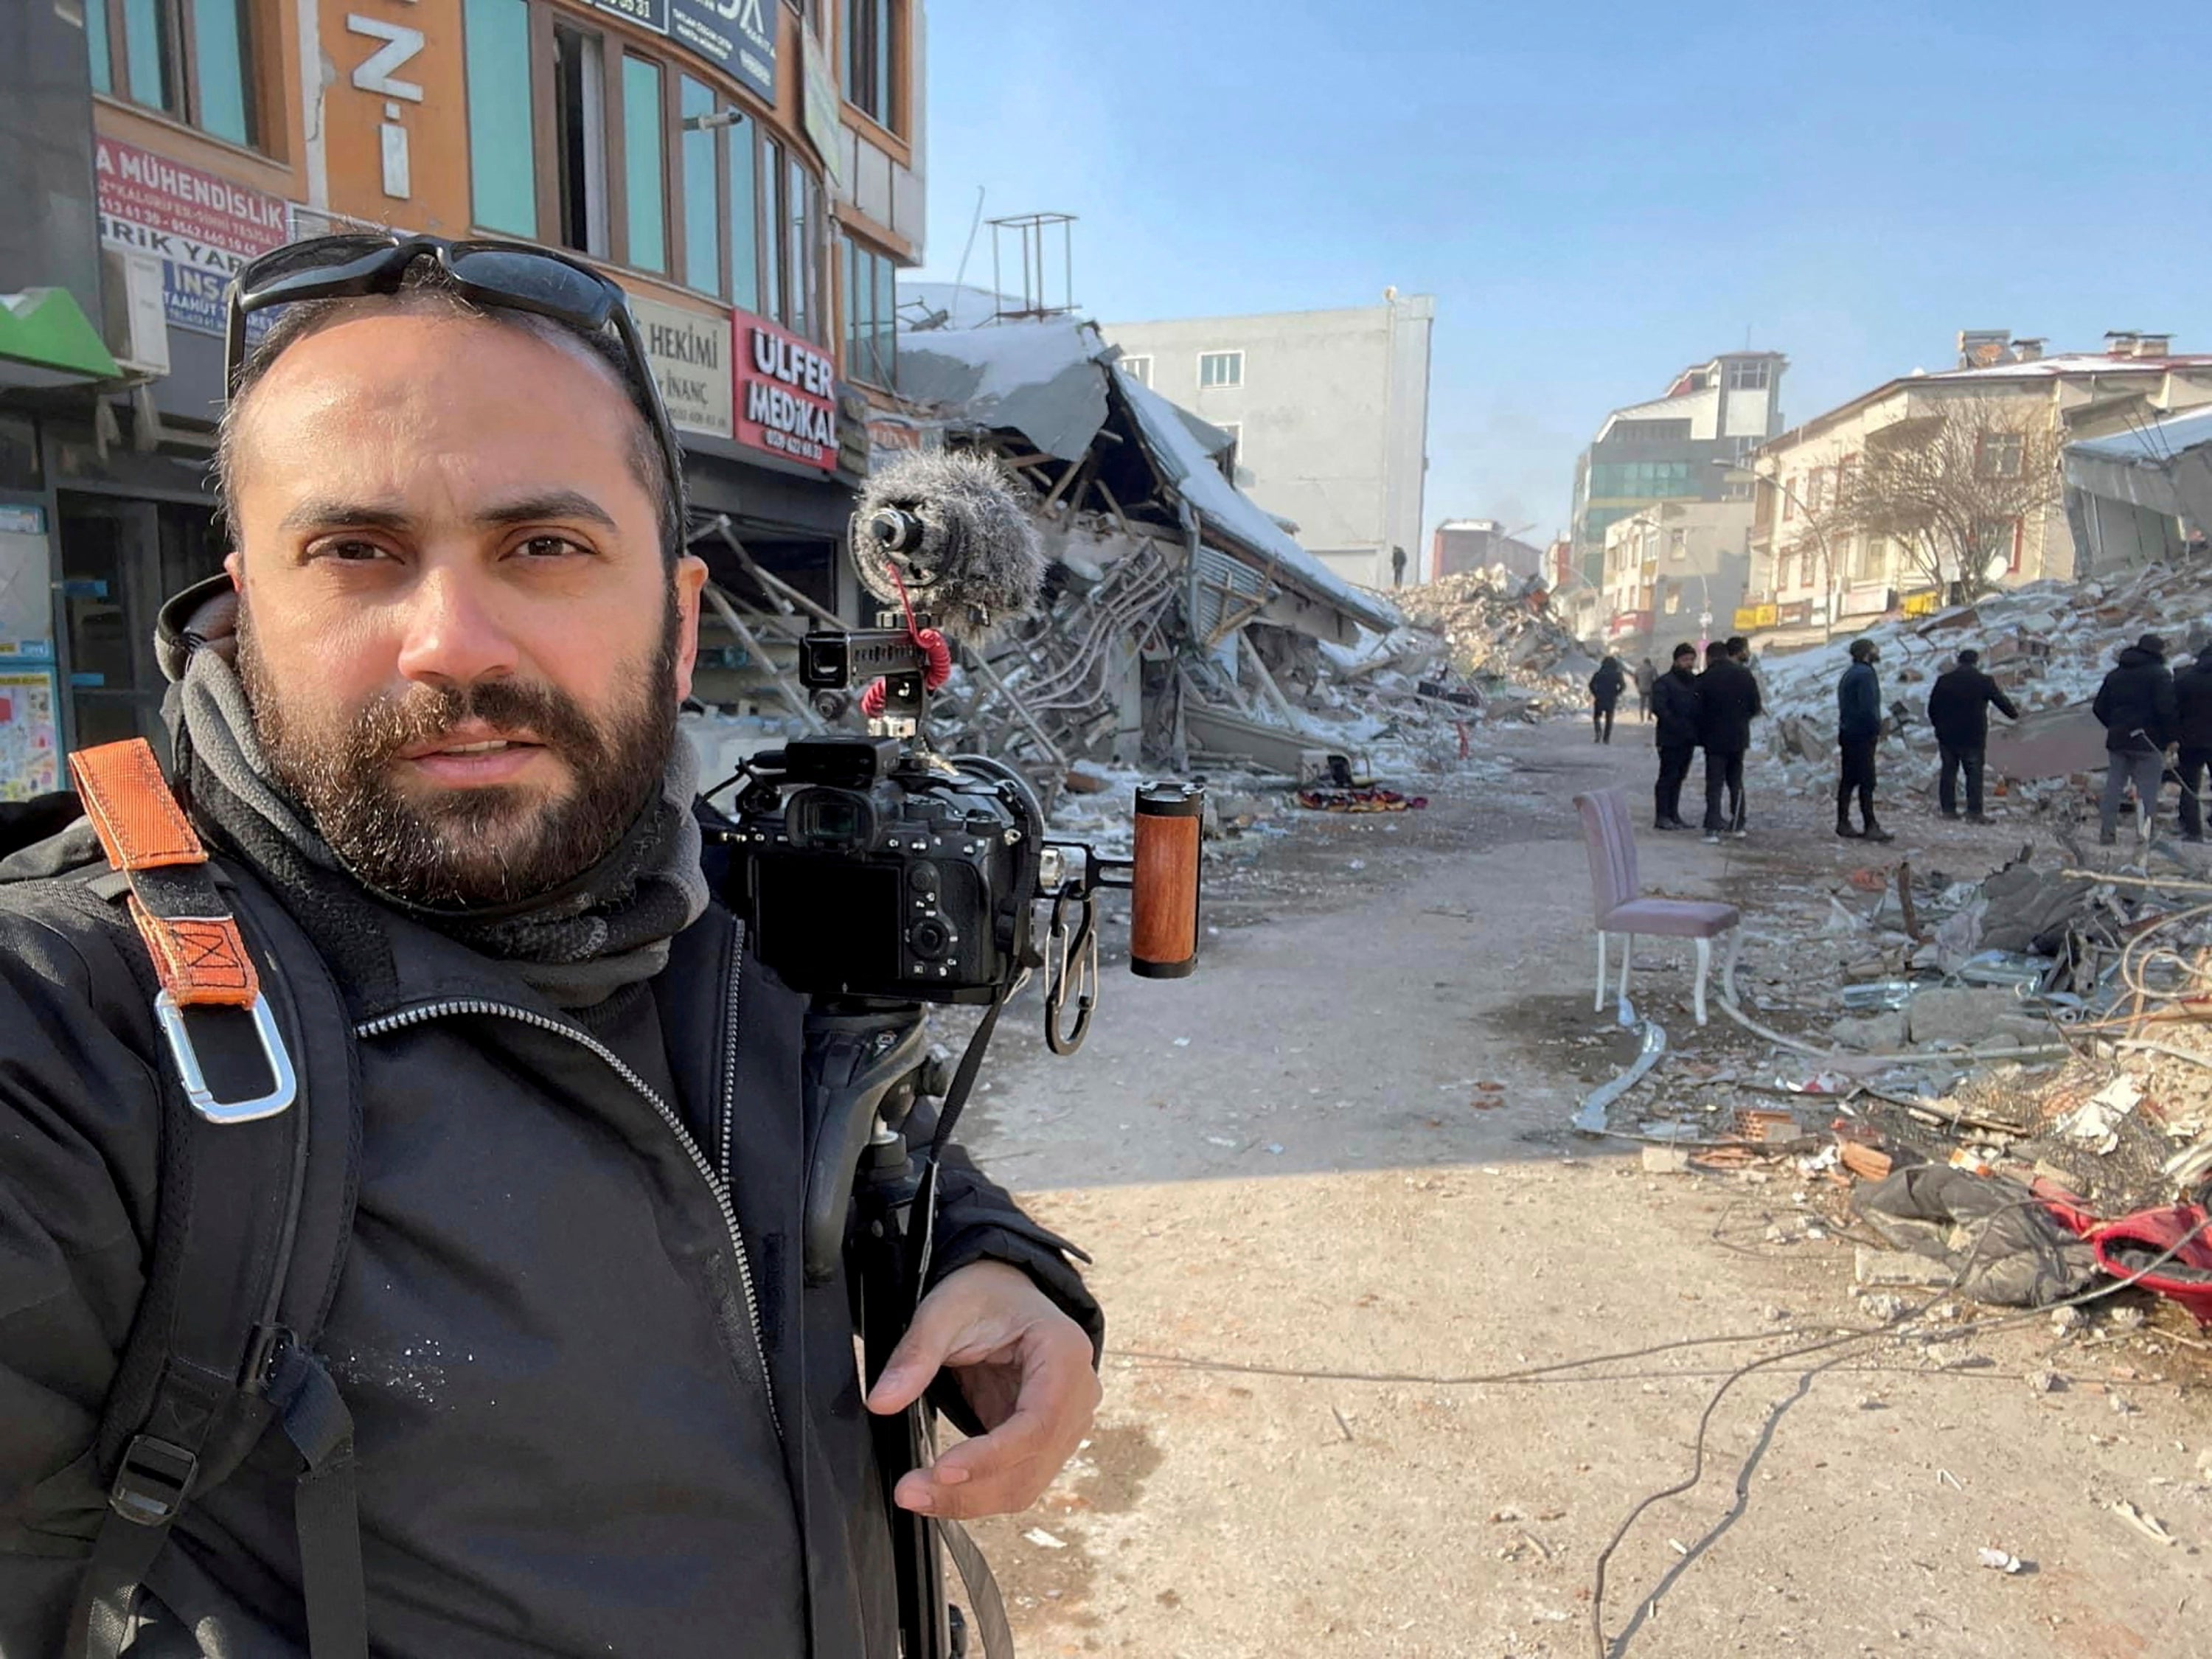 Reuters photographer Issam Abdallah was killed on 13 October